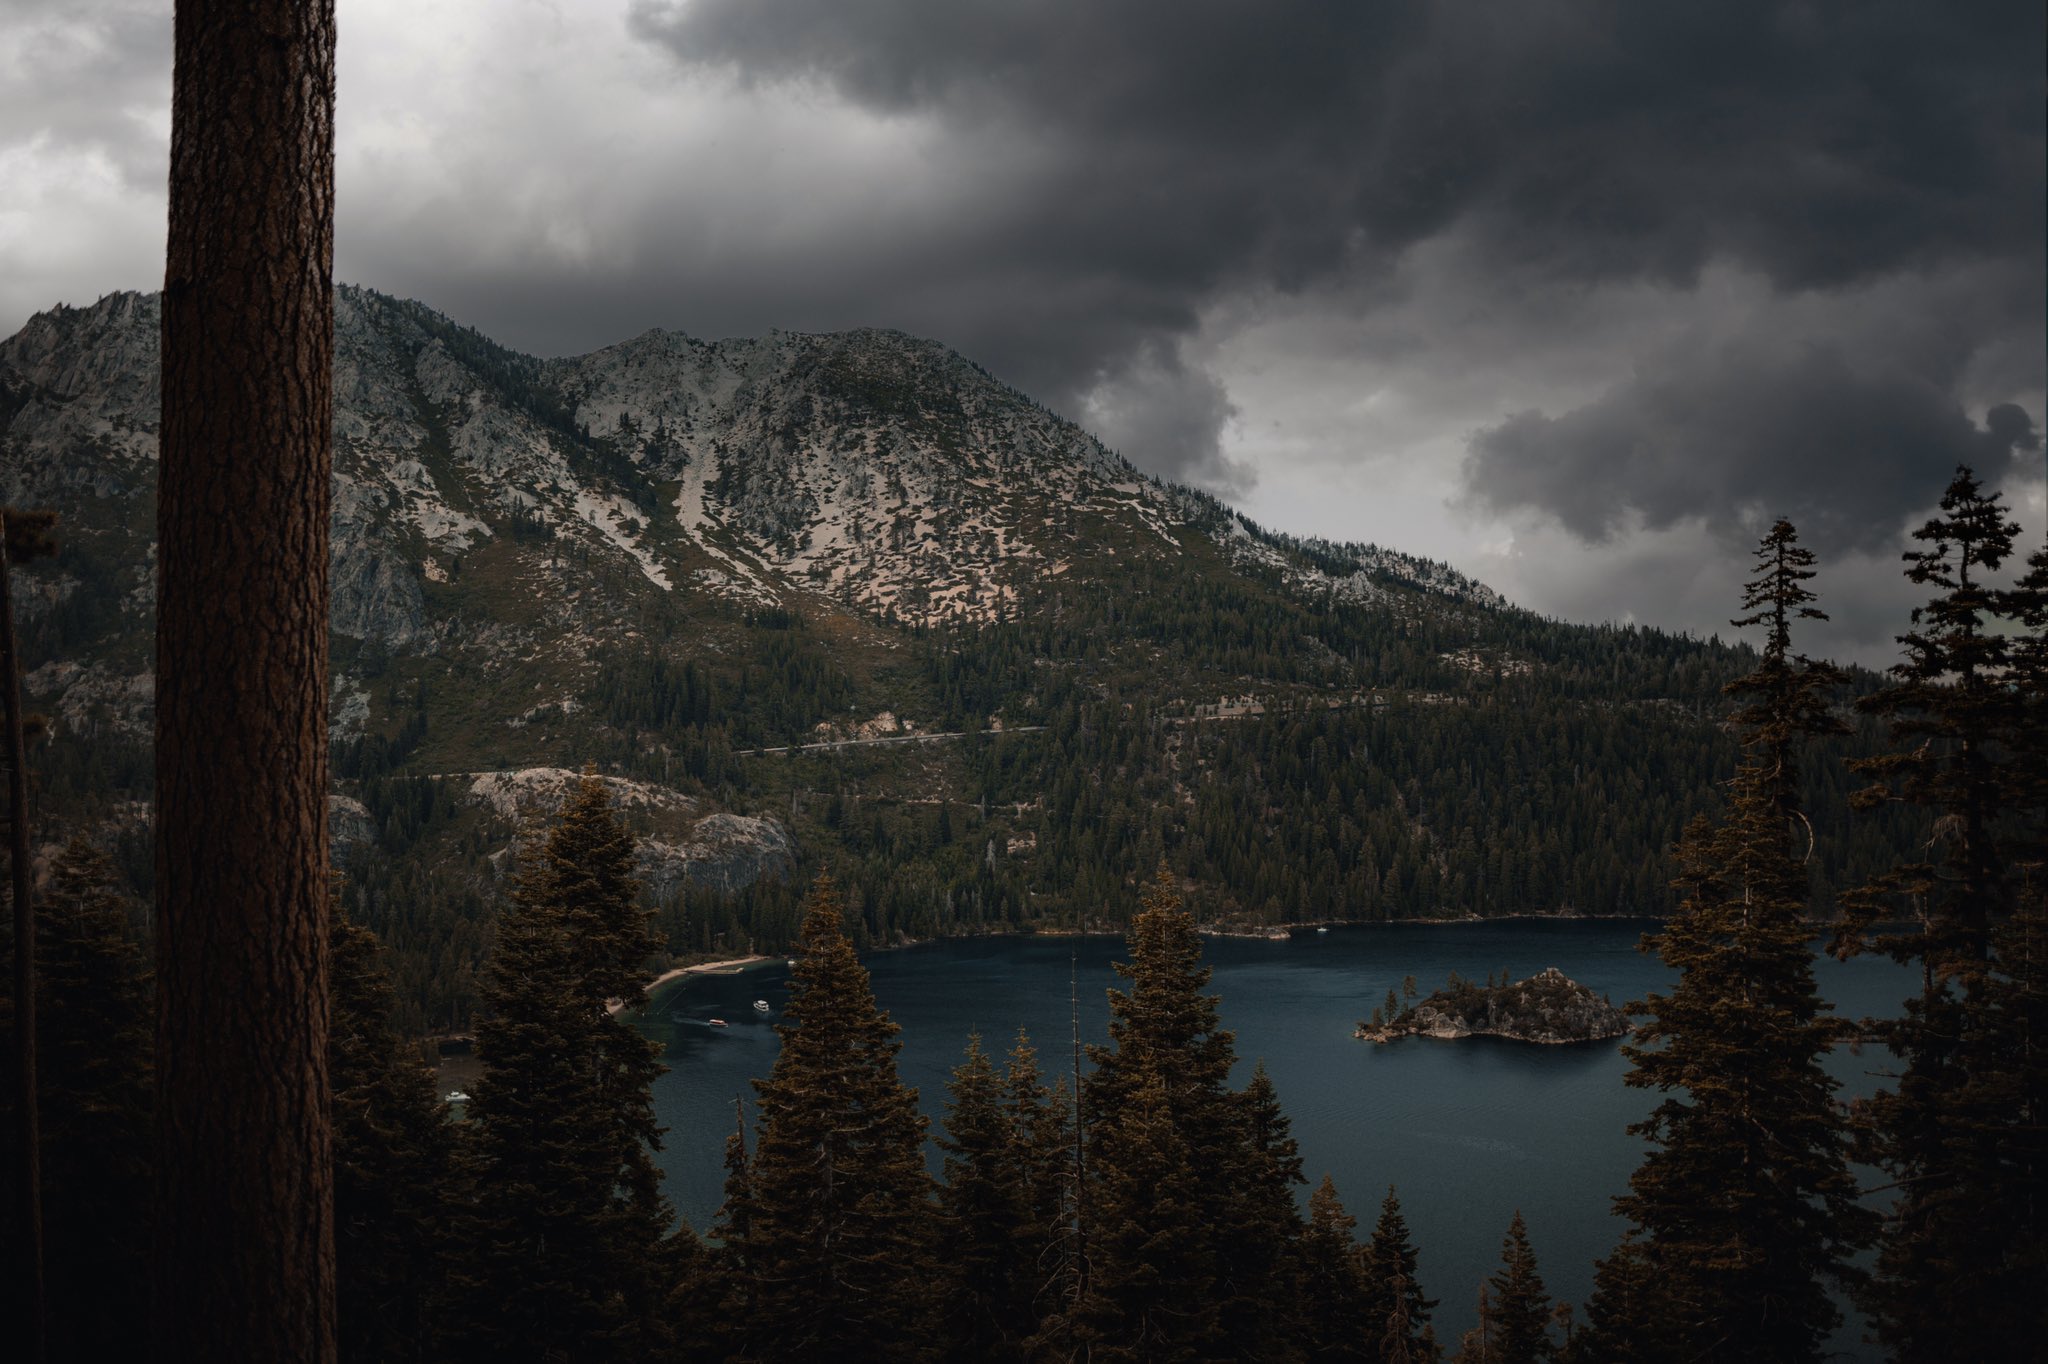 Landscape Mountains Snowy Mountain Pine Trees Forest Nature Lake Clouds Overcast 2048x1364